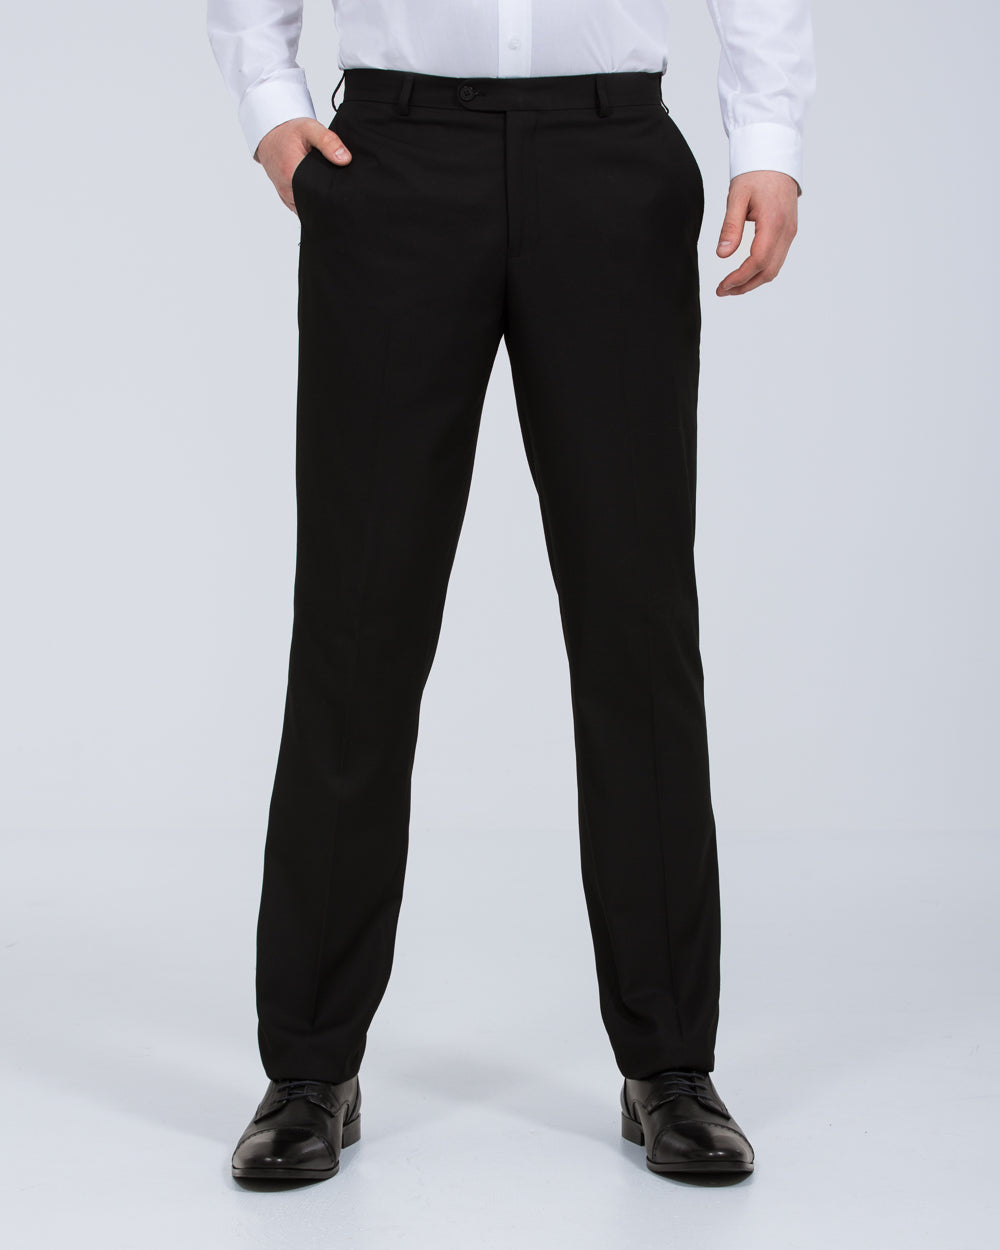 Skopes Romulus Slim Fit Tall Lyfcycle Trousers (black)